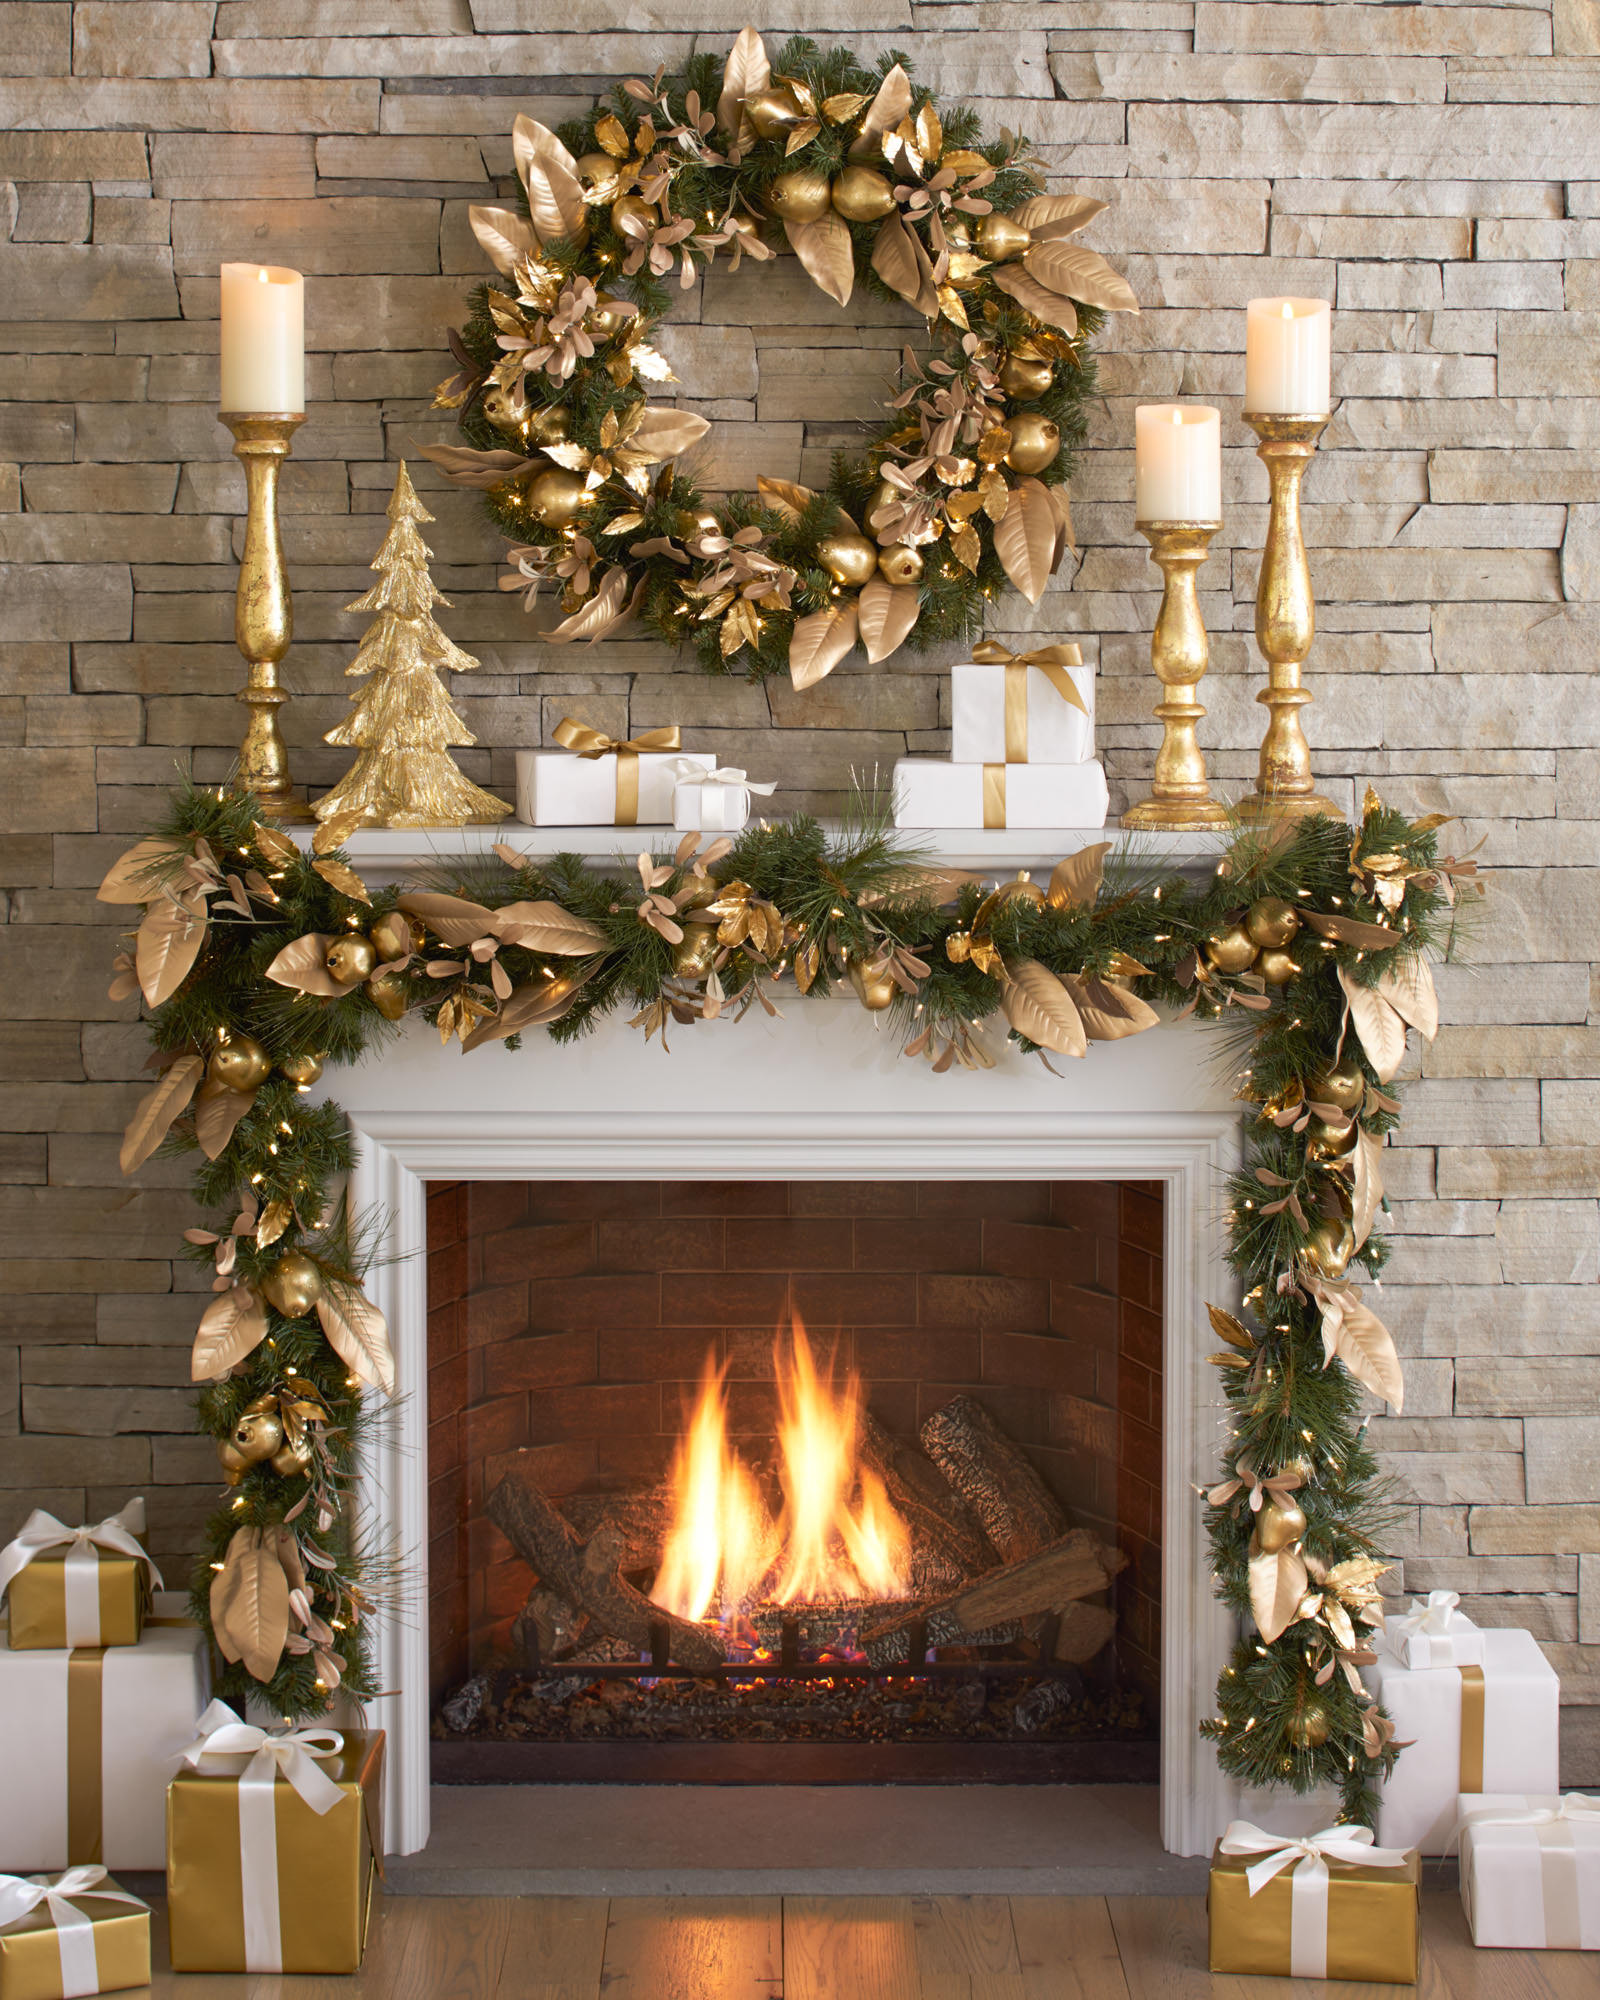 Fireplace Christmas Decorations
 50 Christmas Mantles For Some Serious Decorating Inspiration